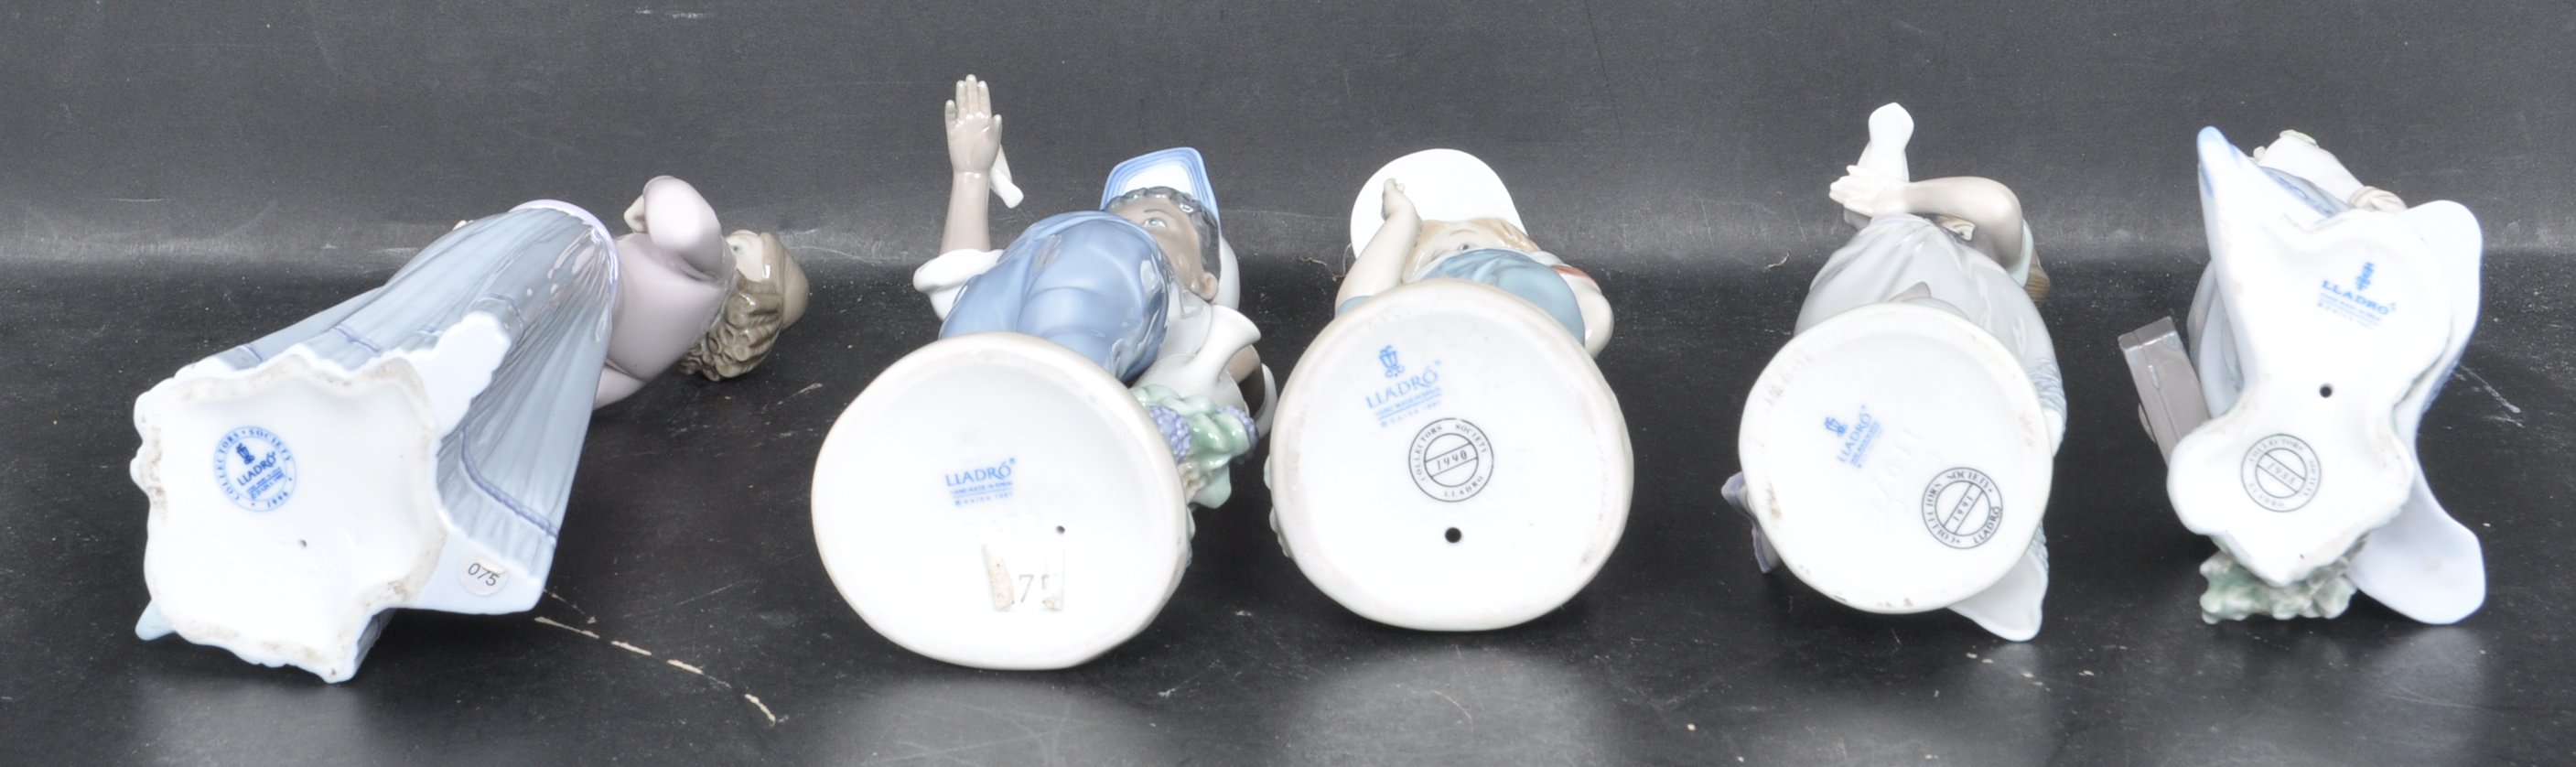 COLLECTION OF FIVE SPANISH LLADRO CERAMIC PORCELAIN FIGURINES - Image 6 of 6